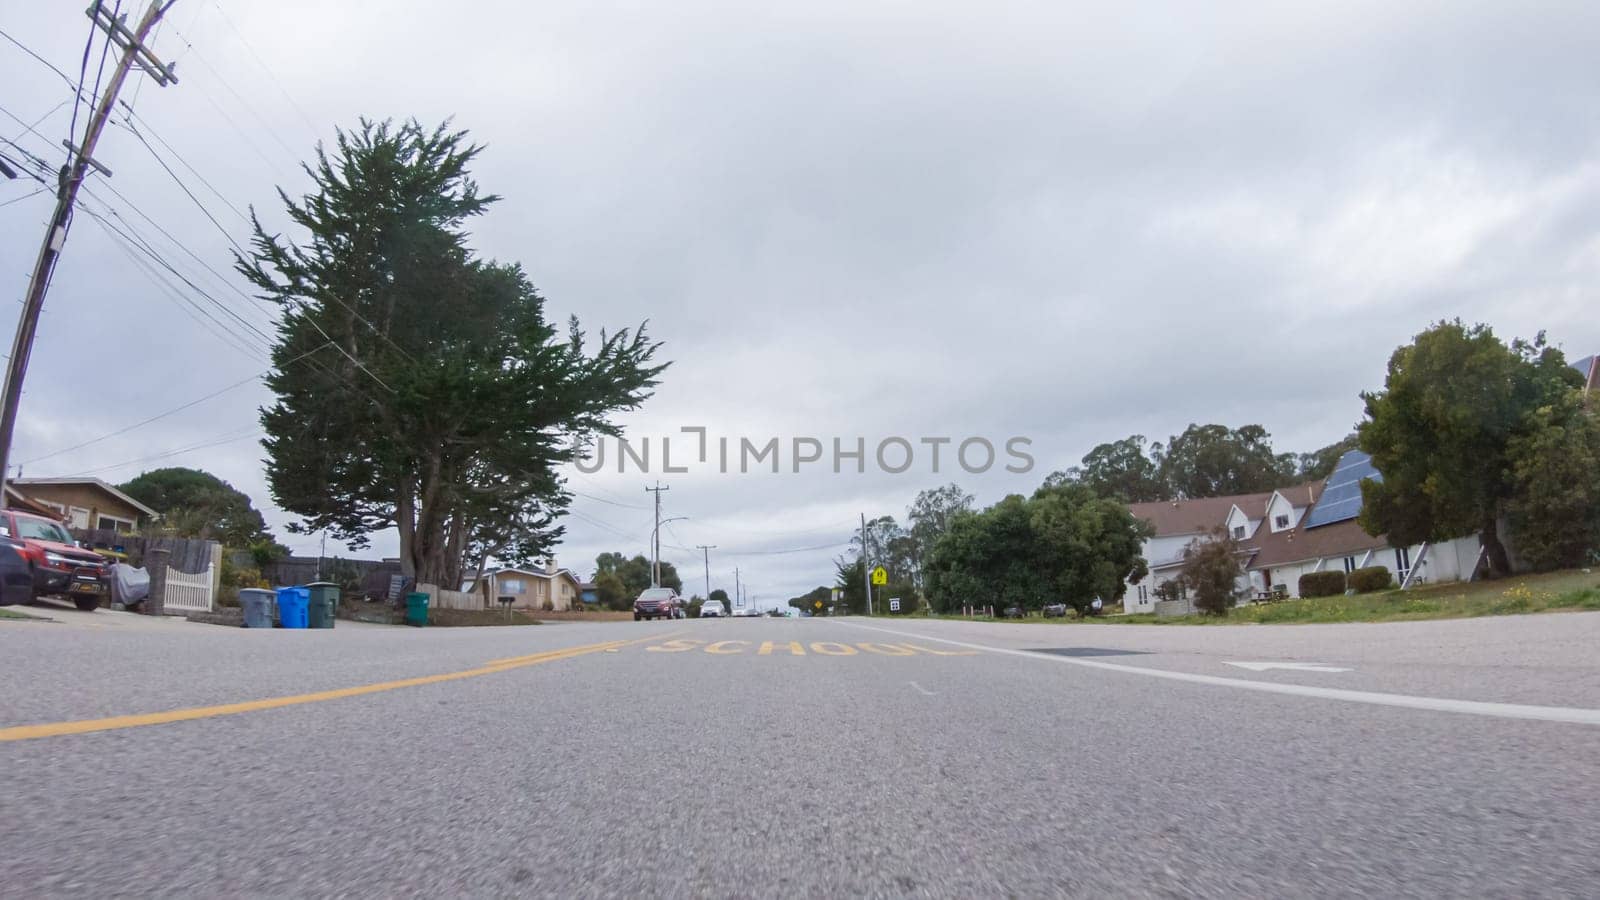 Santa Maria, California, USA-December 6, 2022-Vehicle navigates the streets of Morro Bay, California, during a cloudy winter day. The atmosphere is moody and serene as the overcast sky casts a soft light on the charming buildings and quiet streets of this coastal town.